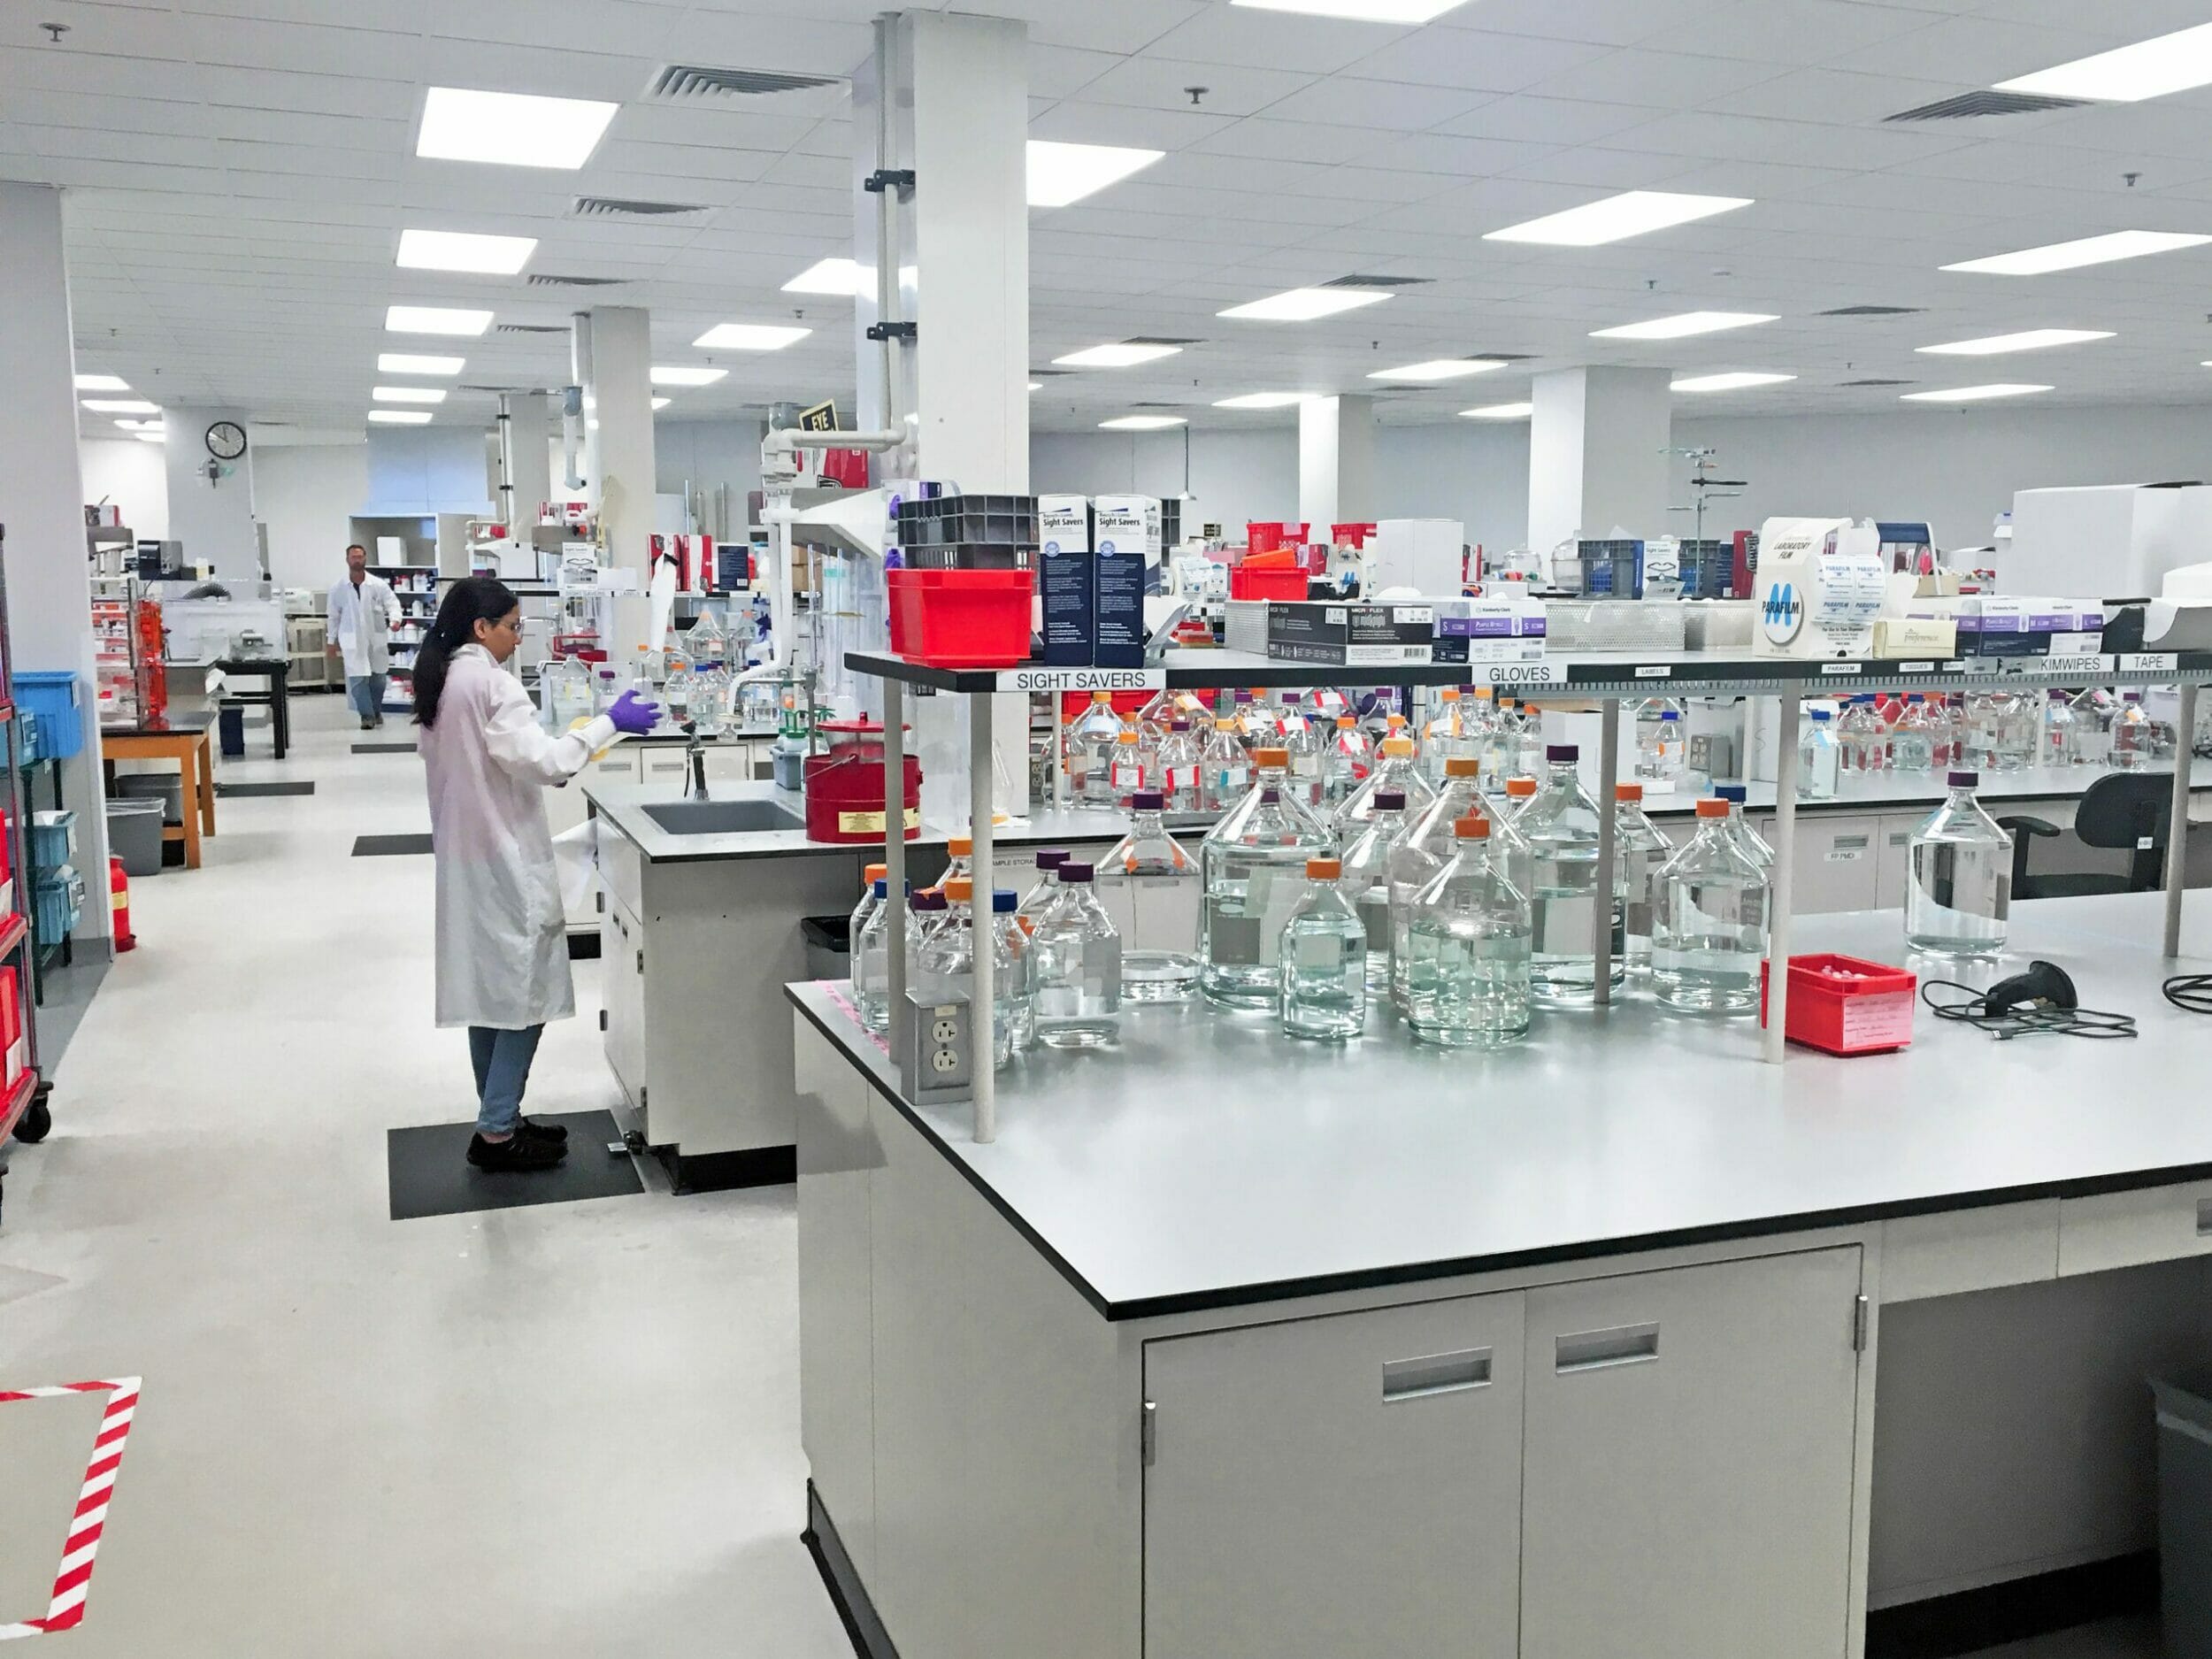 Lab space with one woman working in the lab